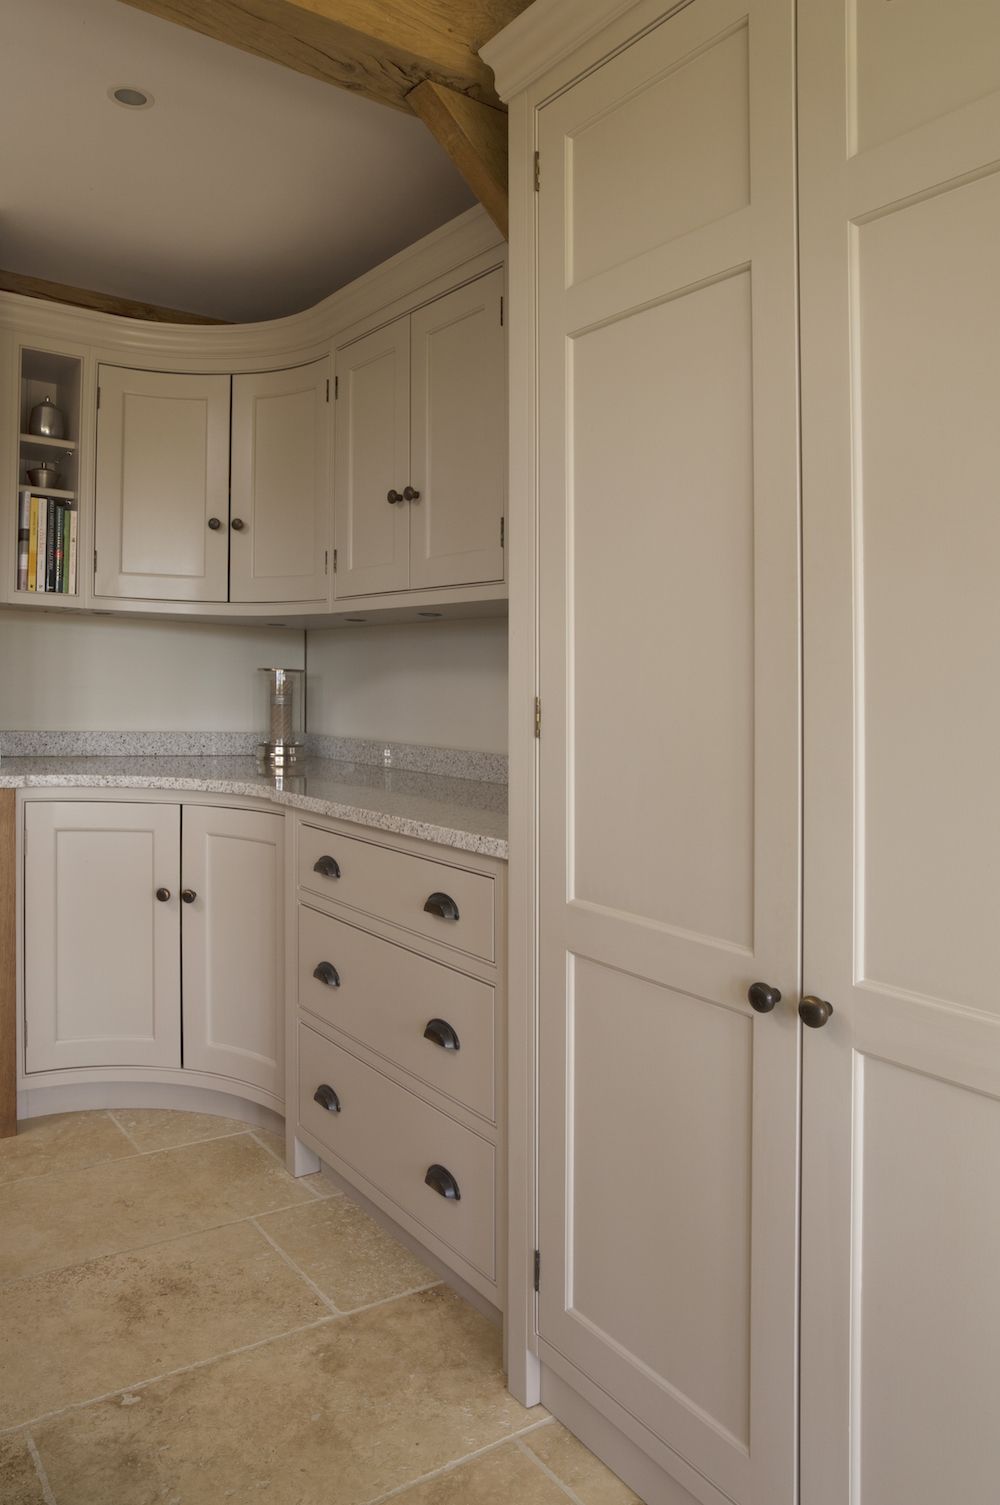 Hand-painted kitchen cabinetry in Farrow & Ball "Elephant's Breath".